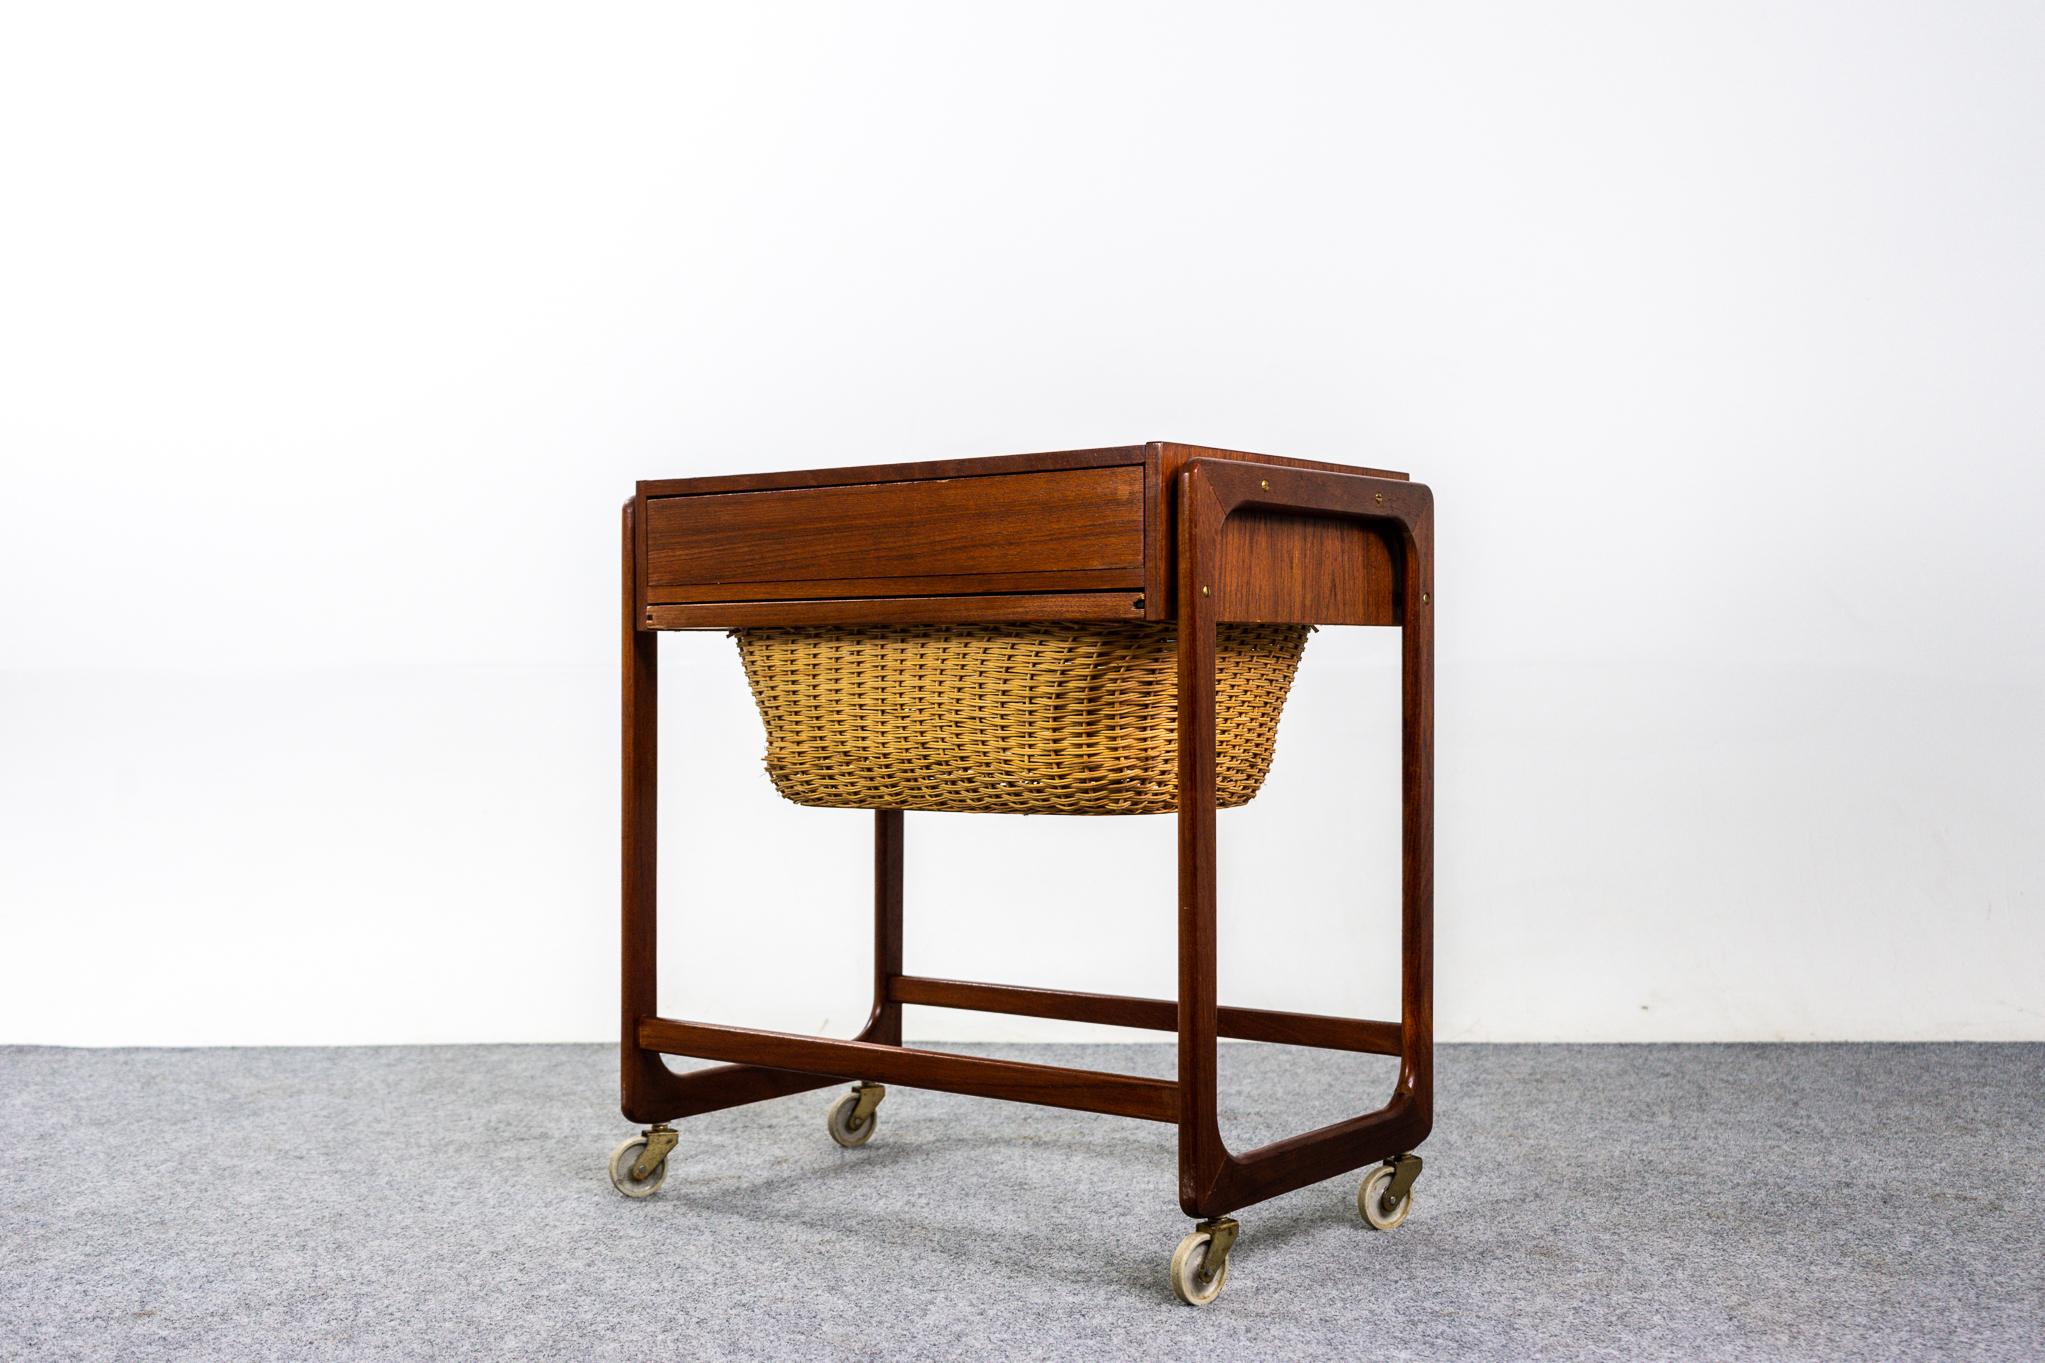 Mid-20th Century Danish Modern Teak Sewing Table For Sale